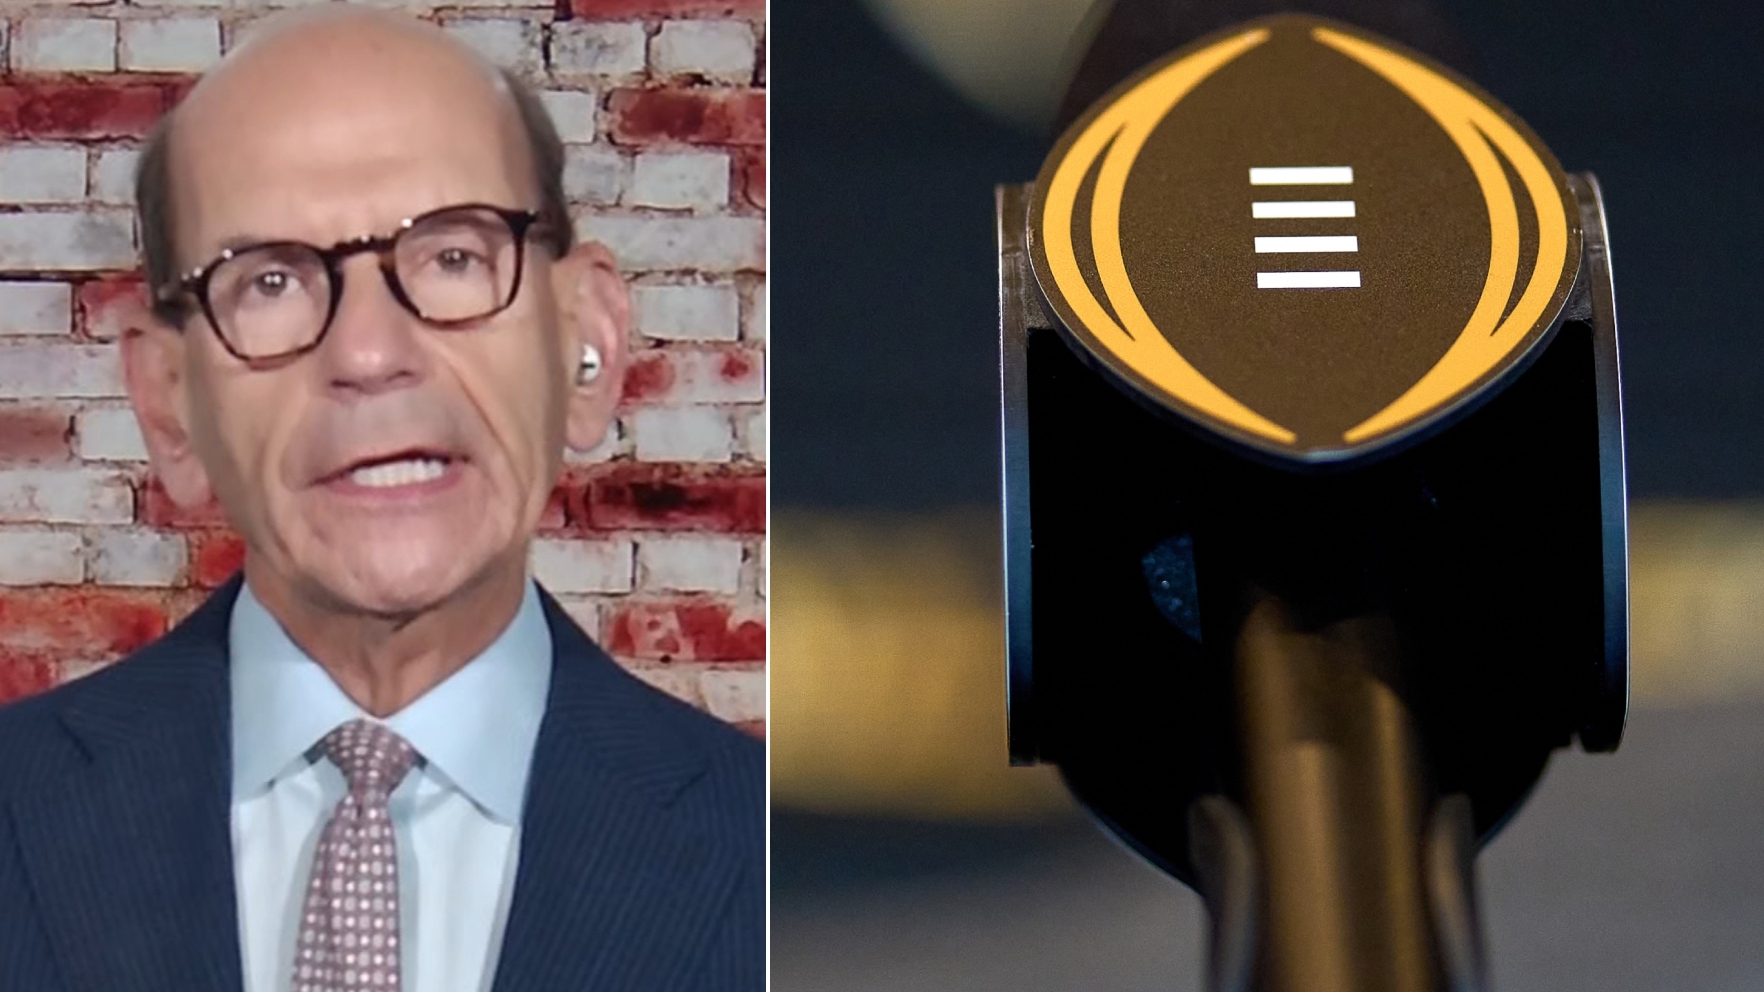 Finebaum calls out CFP committee for lack of transparency